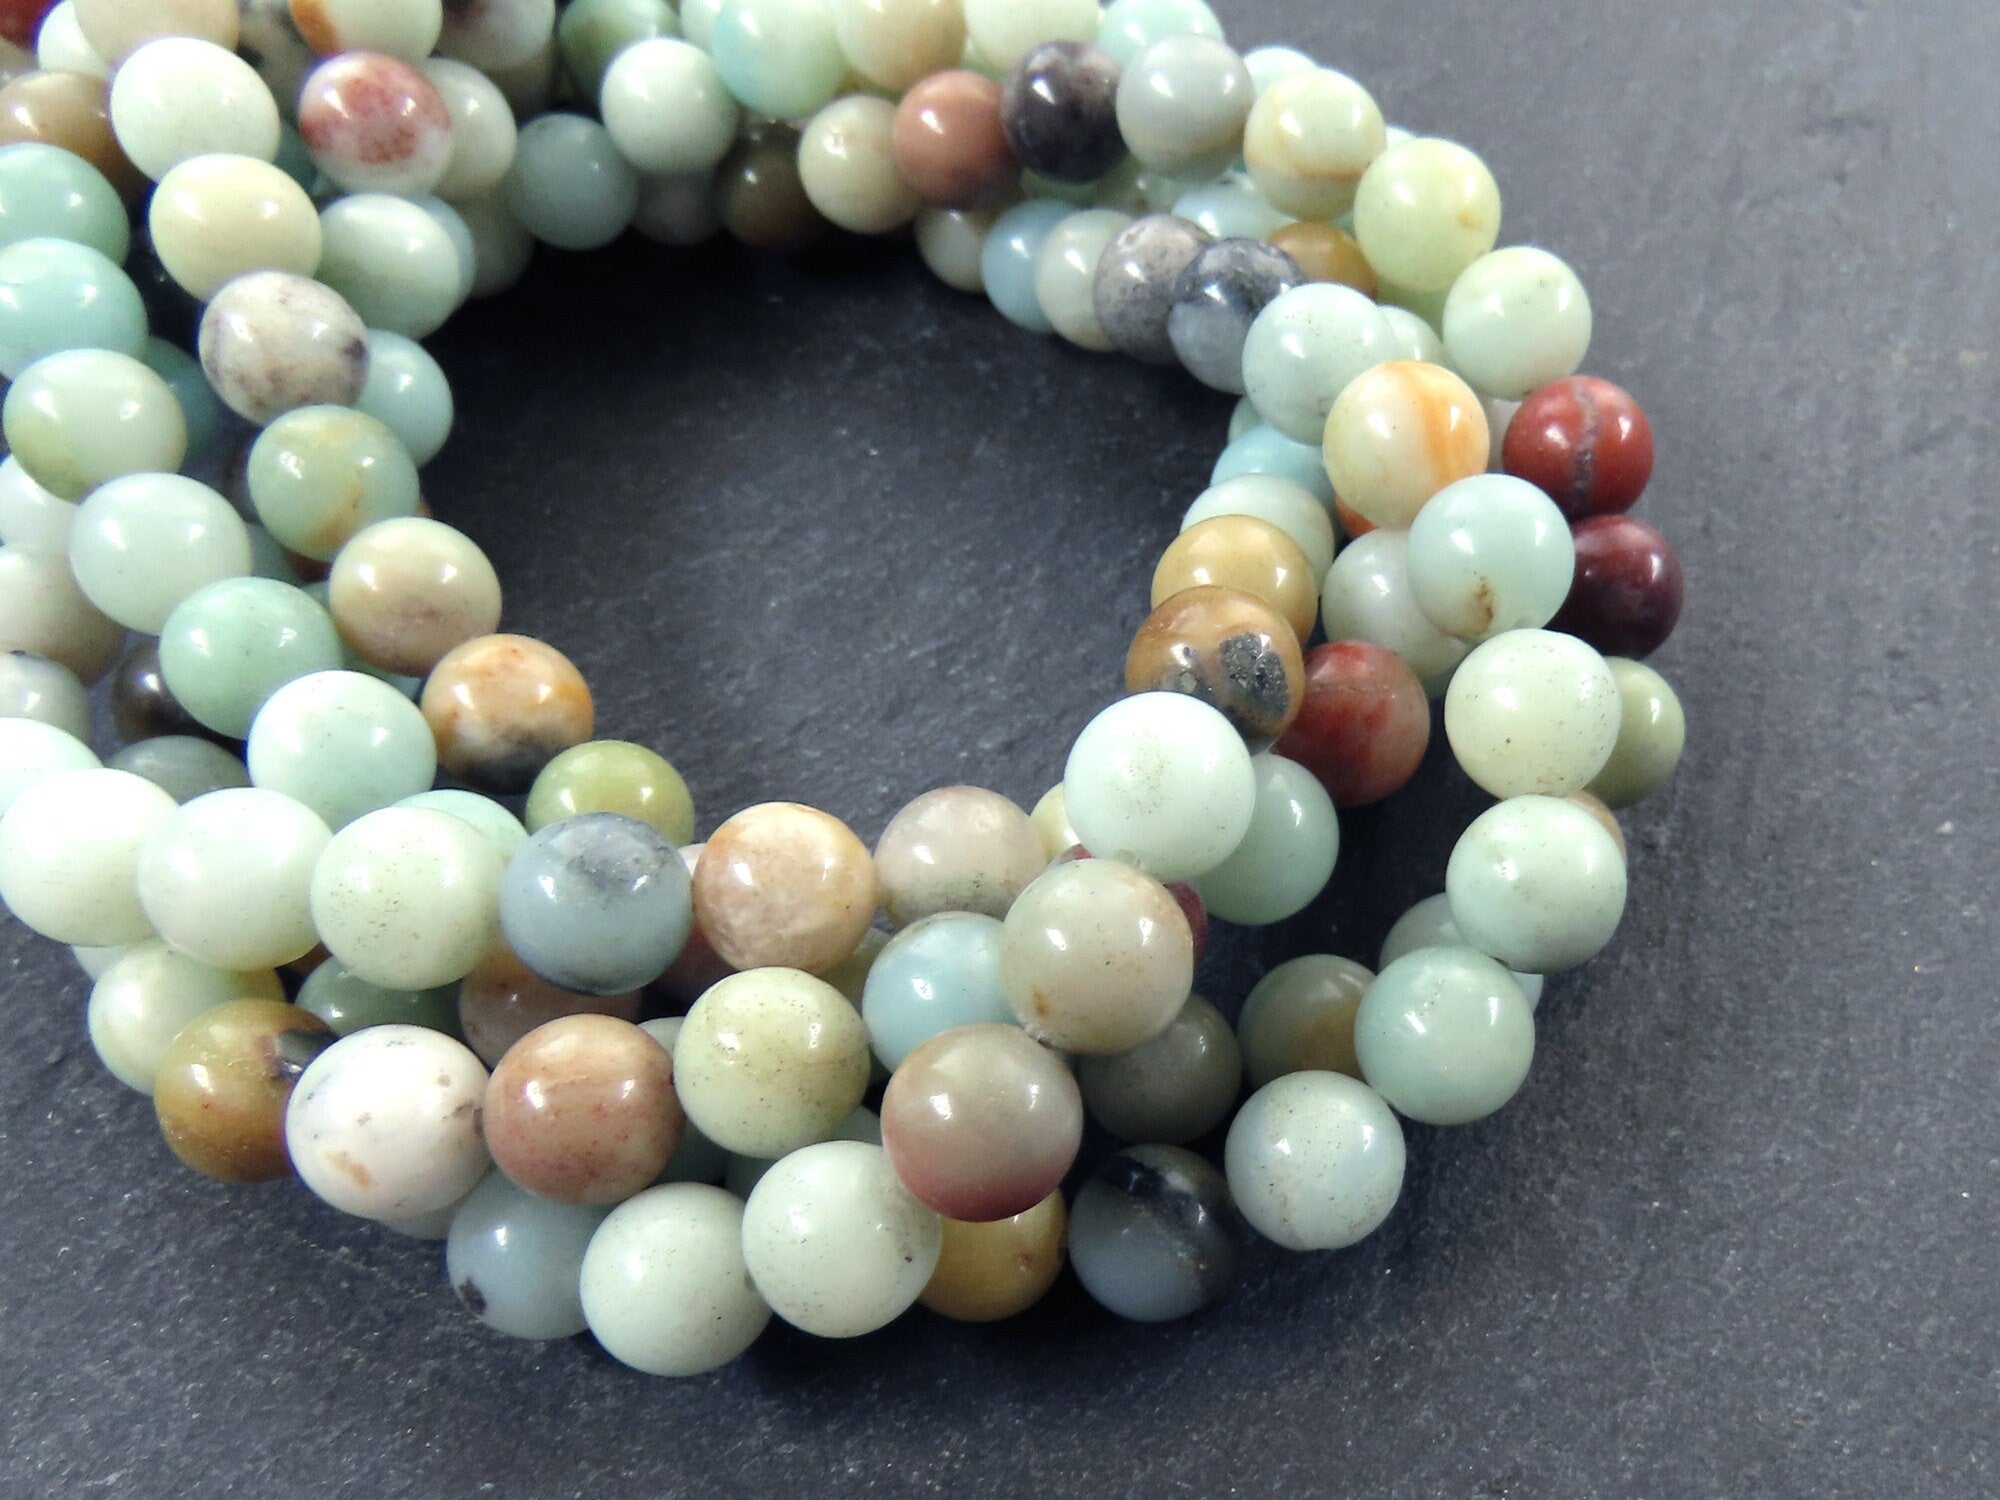 8mm Natural Multicolored Amazonite Round Beads, Gemstone Beads, Round Beads, Smooth Cut, Loose Beads, Full Strand 15 inch Strand